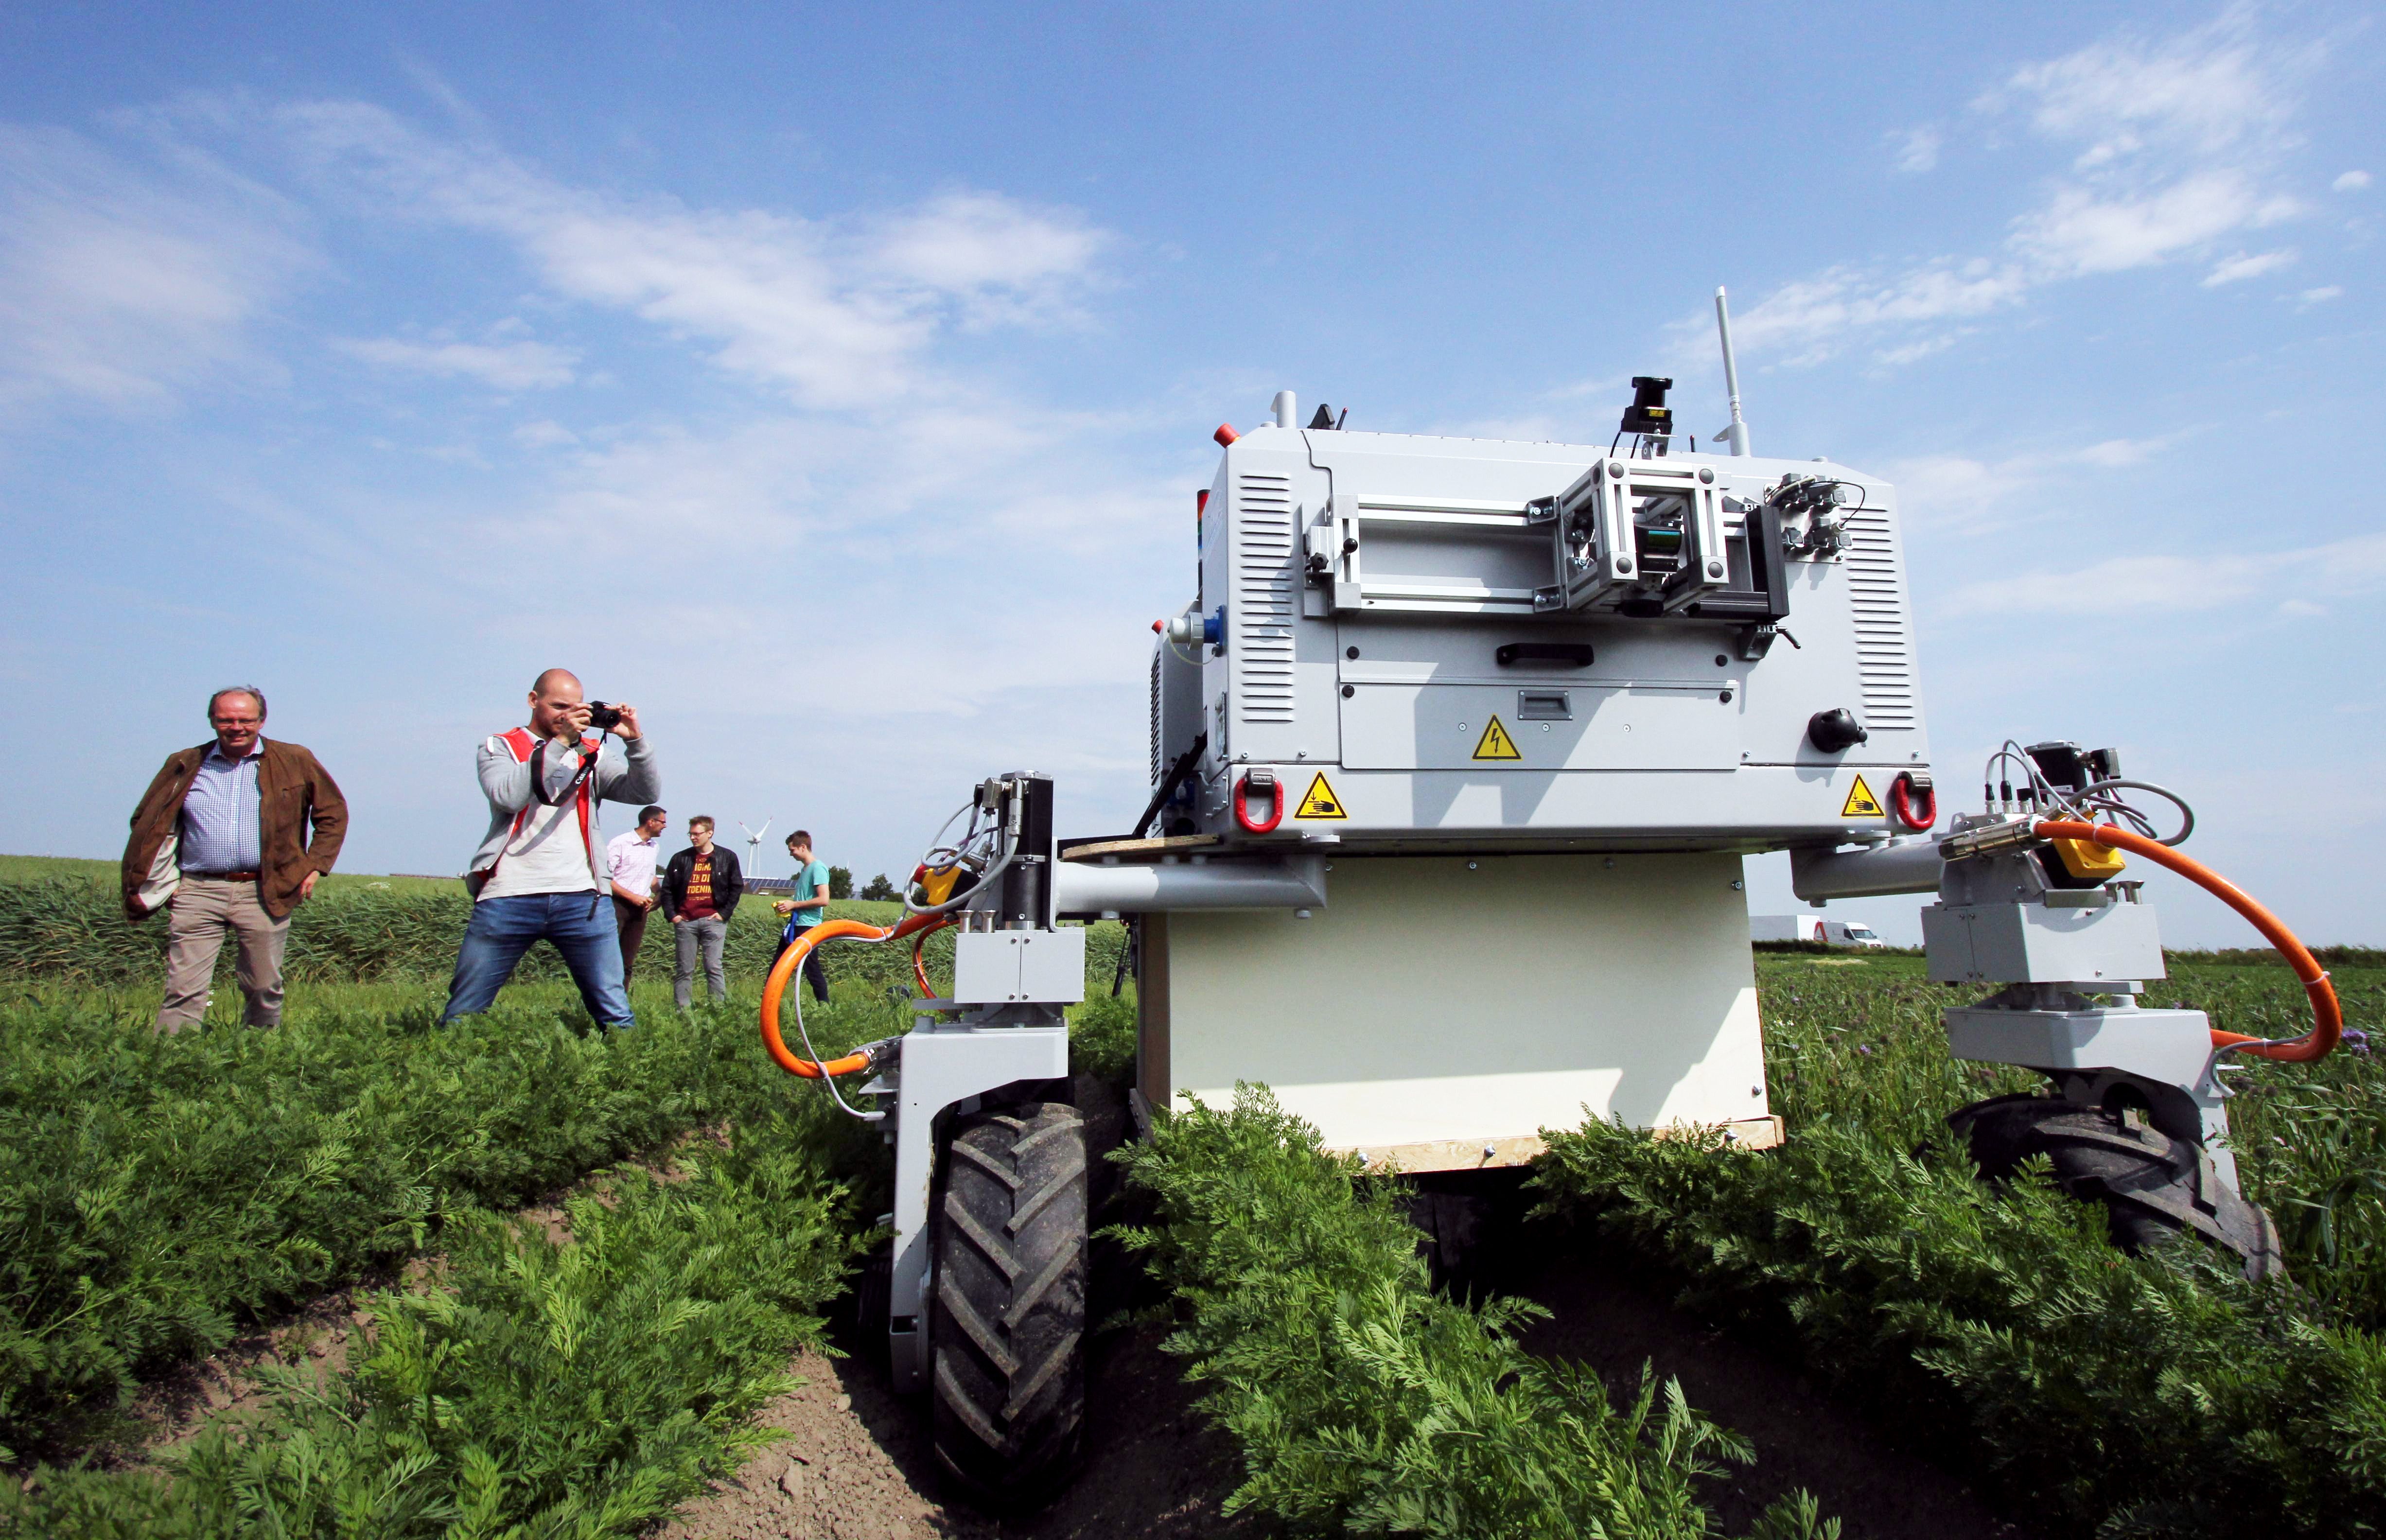 In recent years, there has been increasing interest in the idea of destroying individual weeds using specialist robots